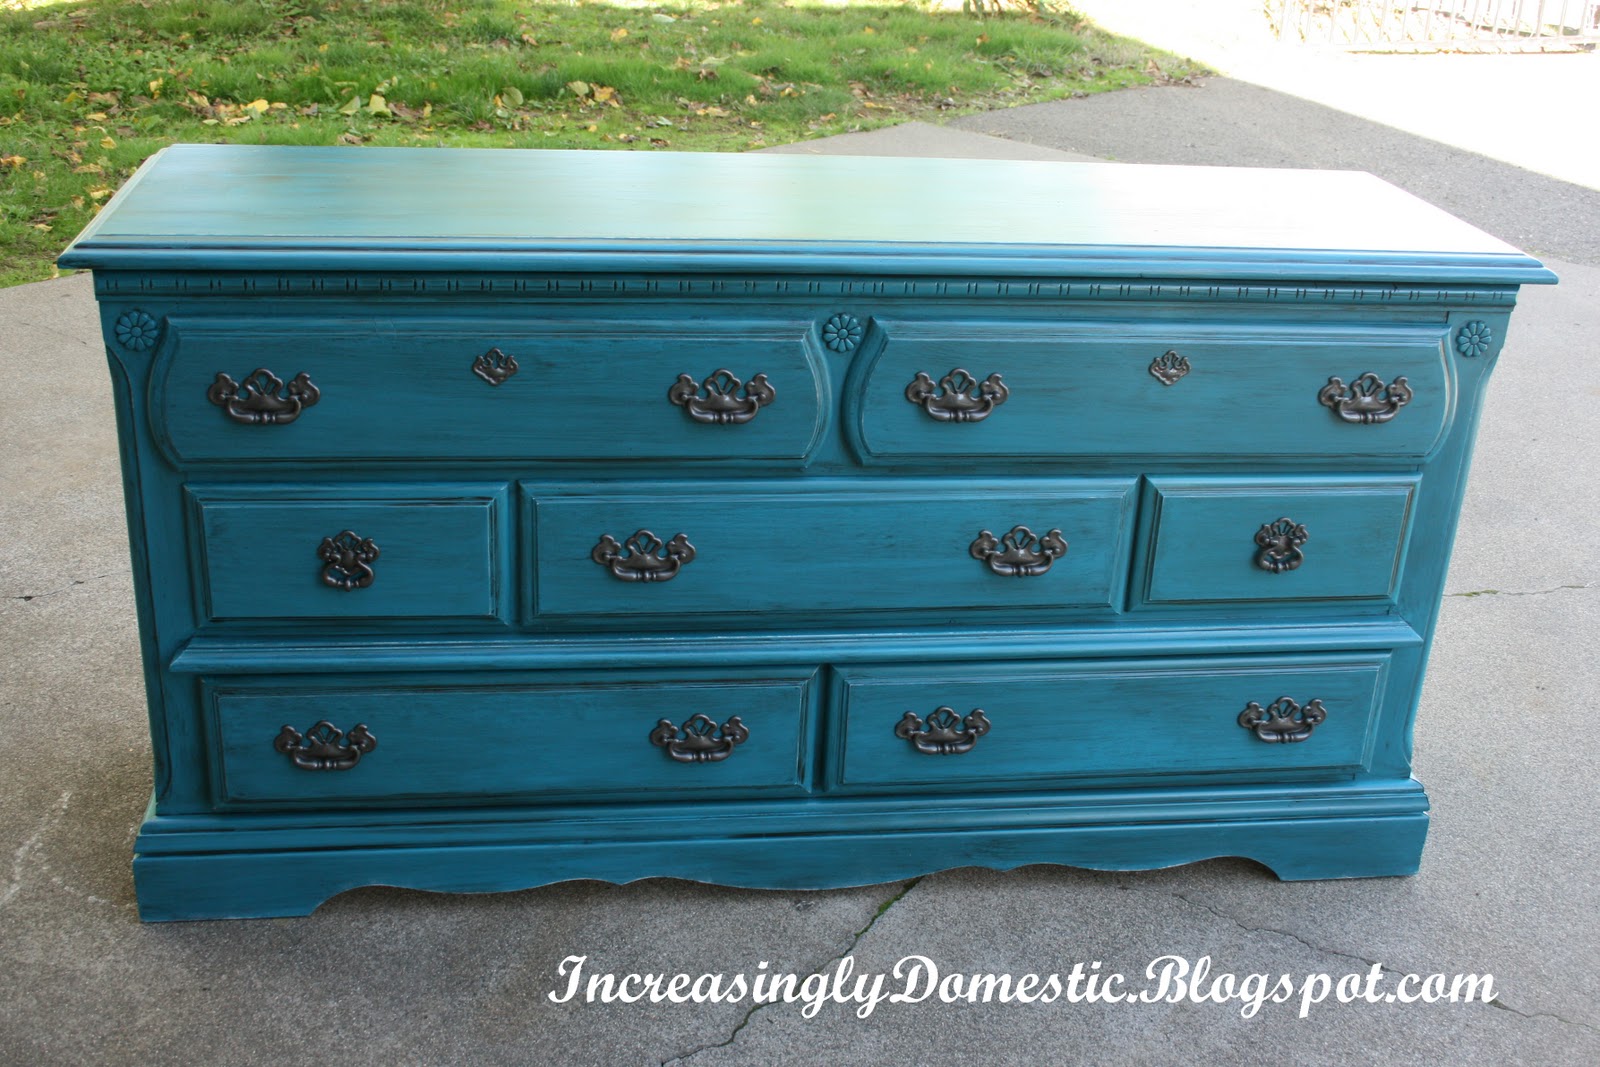 Increasingly Domestic: Refinished Dresser